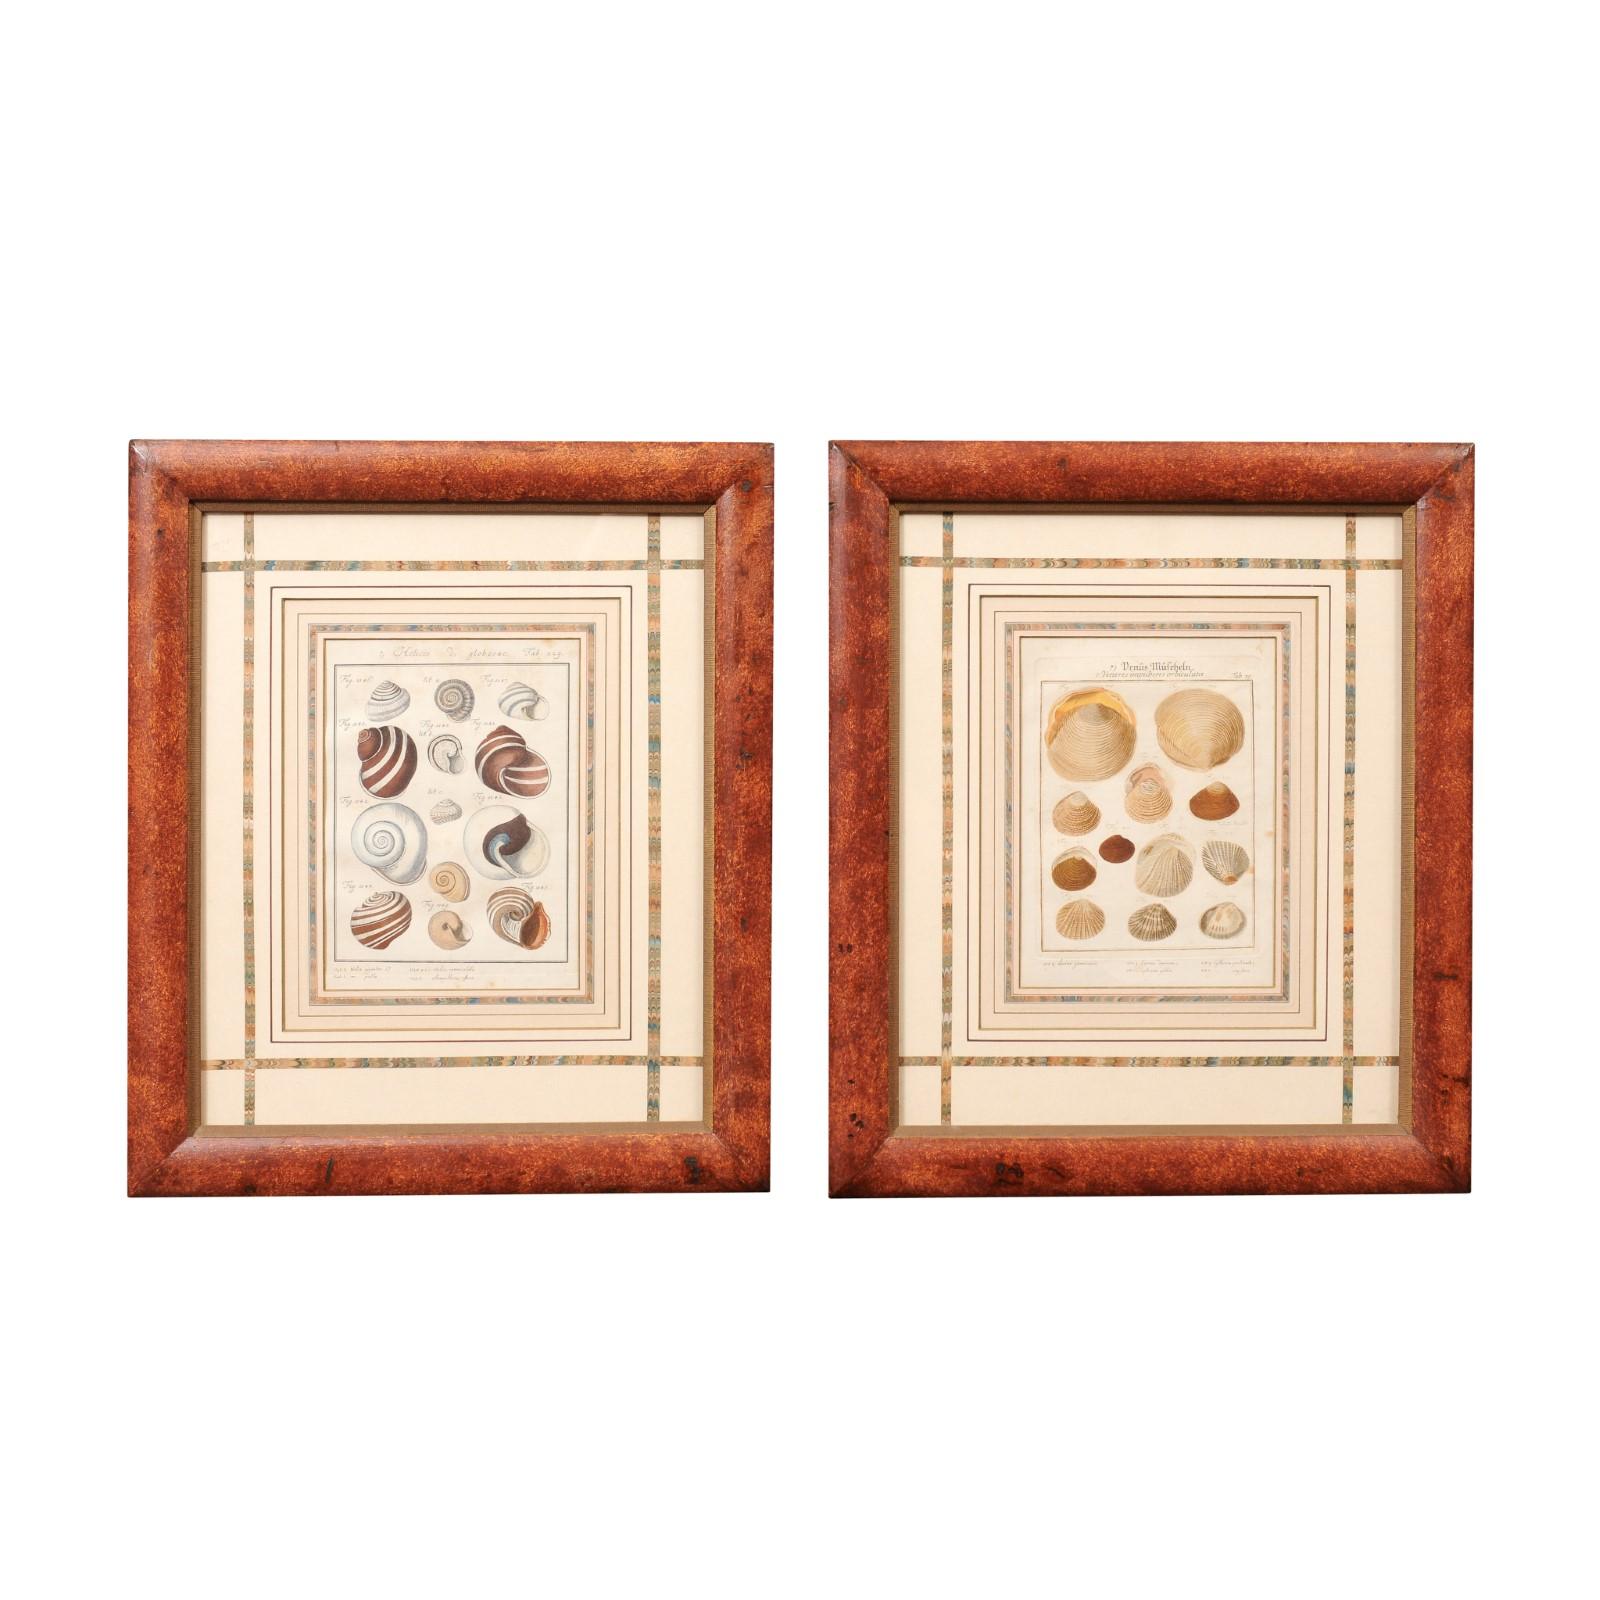 Pair of Painted Faux Wood Framed 18th Century Shell Engravings with Marbleized Matting & later hand coloring